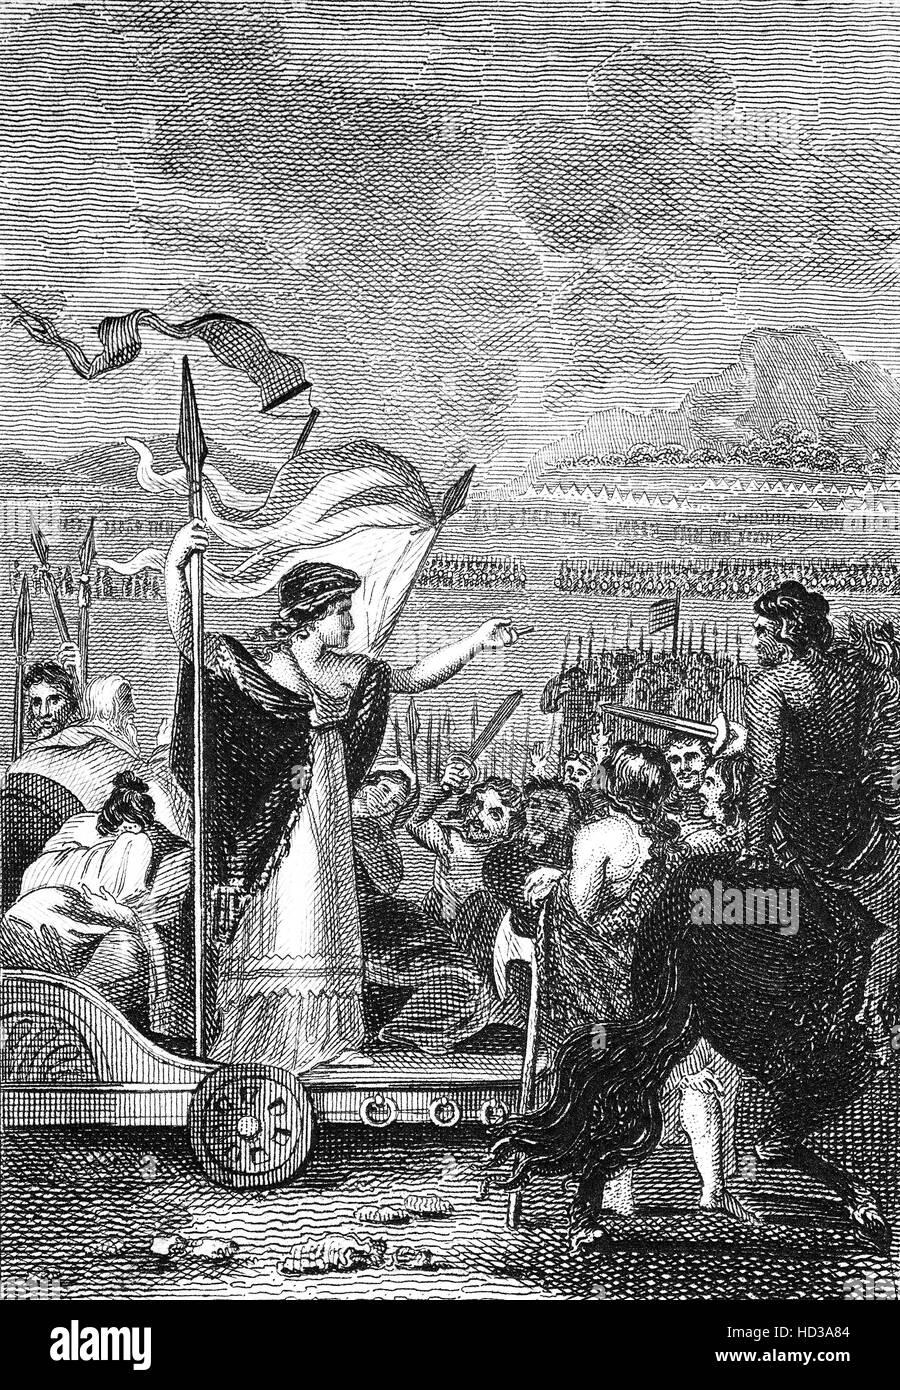 Boudica, aka Boudicea, queen of the British Celtic Iceni tribe, with her troops prior to an uprising against the occupying forces of the Roman Empire. They destroyed Camulodunum (modern Colchester), a settlement for discharged Roman soldiers and site of a temple to the former Emperor Claudius in AD 60 or 61. Stock Photo